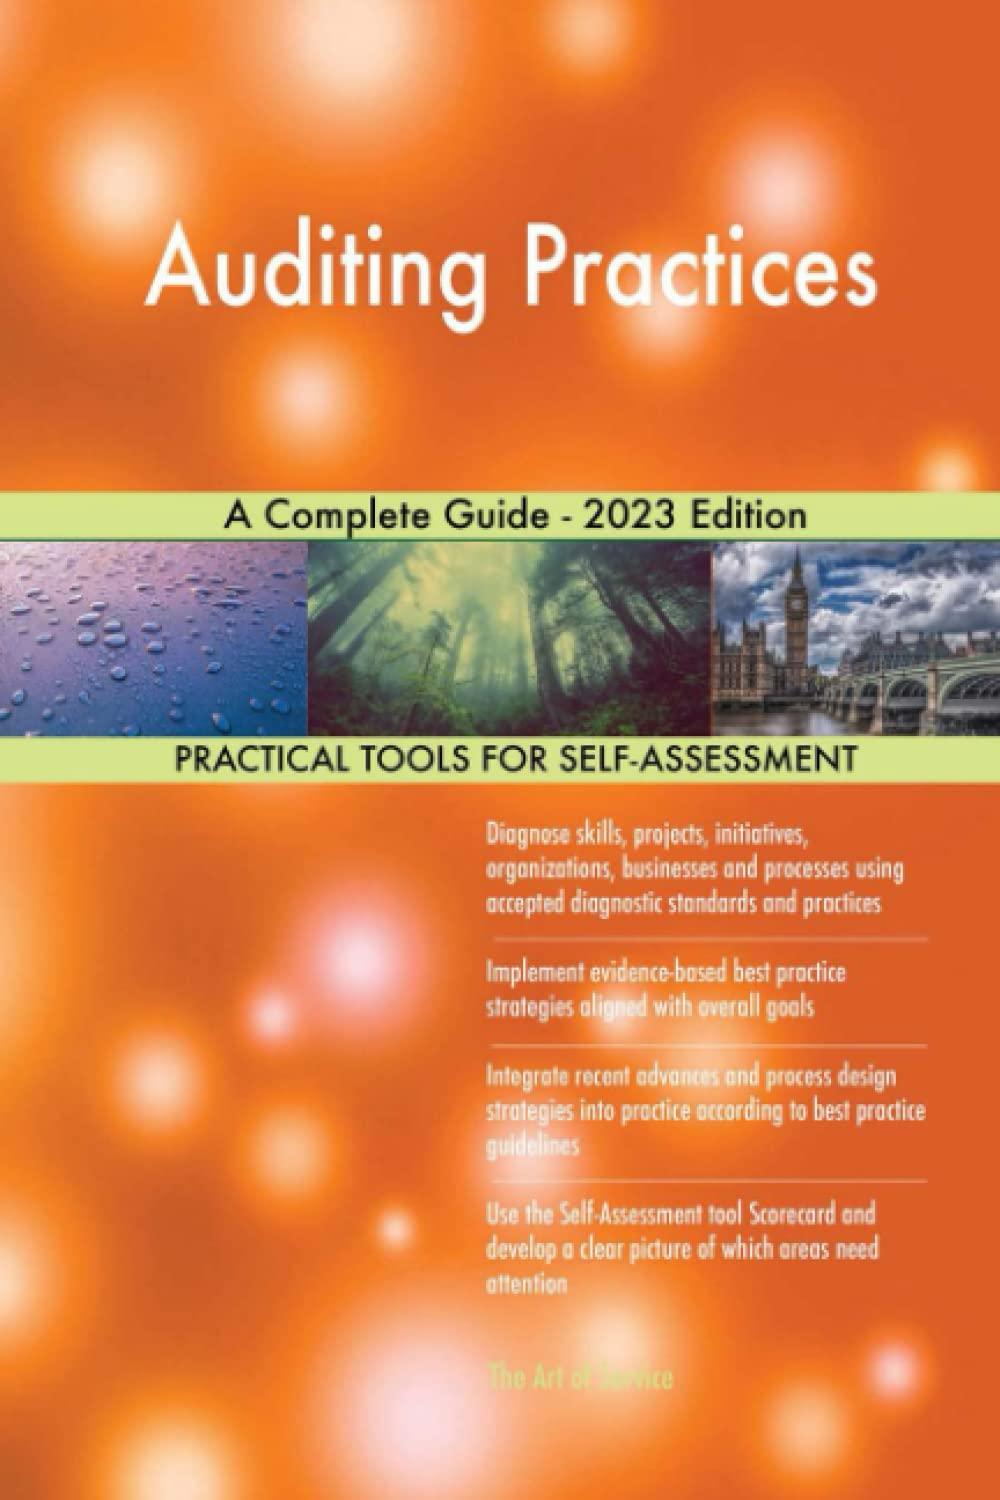 auditing practices a complete guide 2023rd edition gerardus blokdyk 1038804450, 978-1038804457